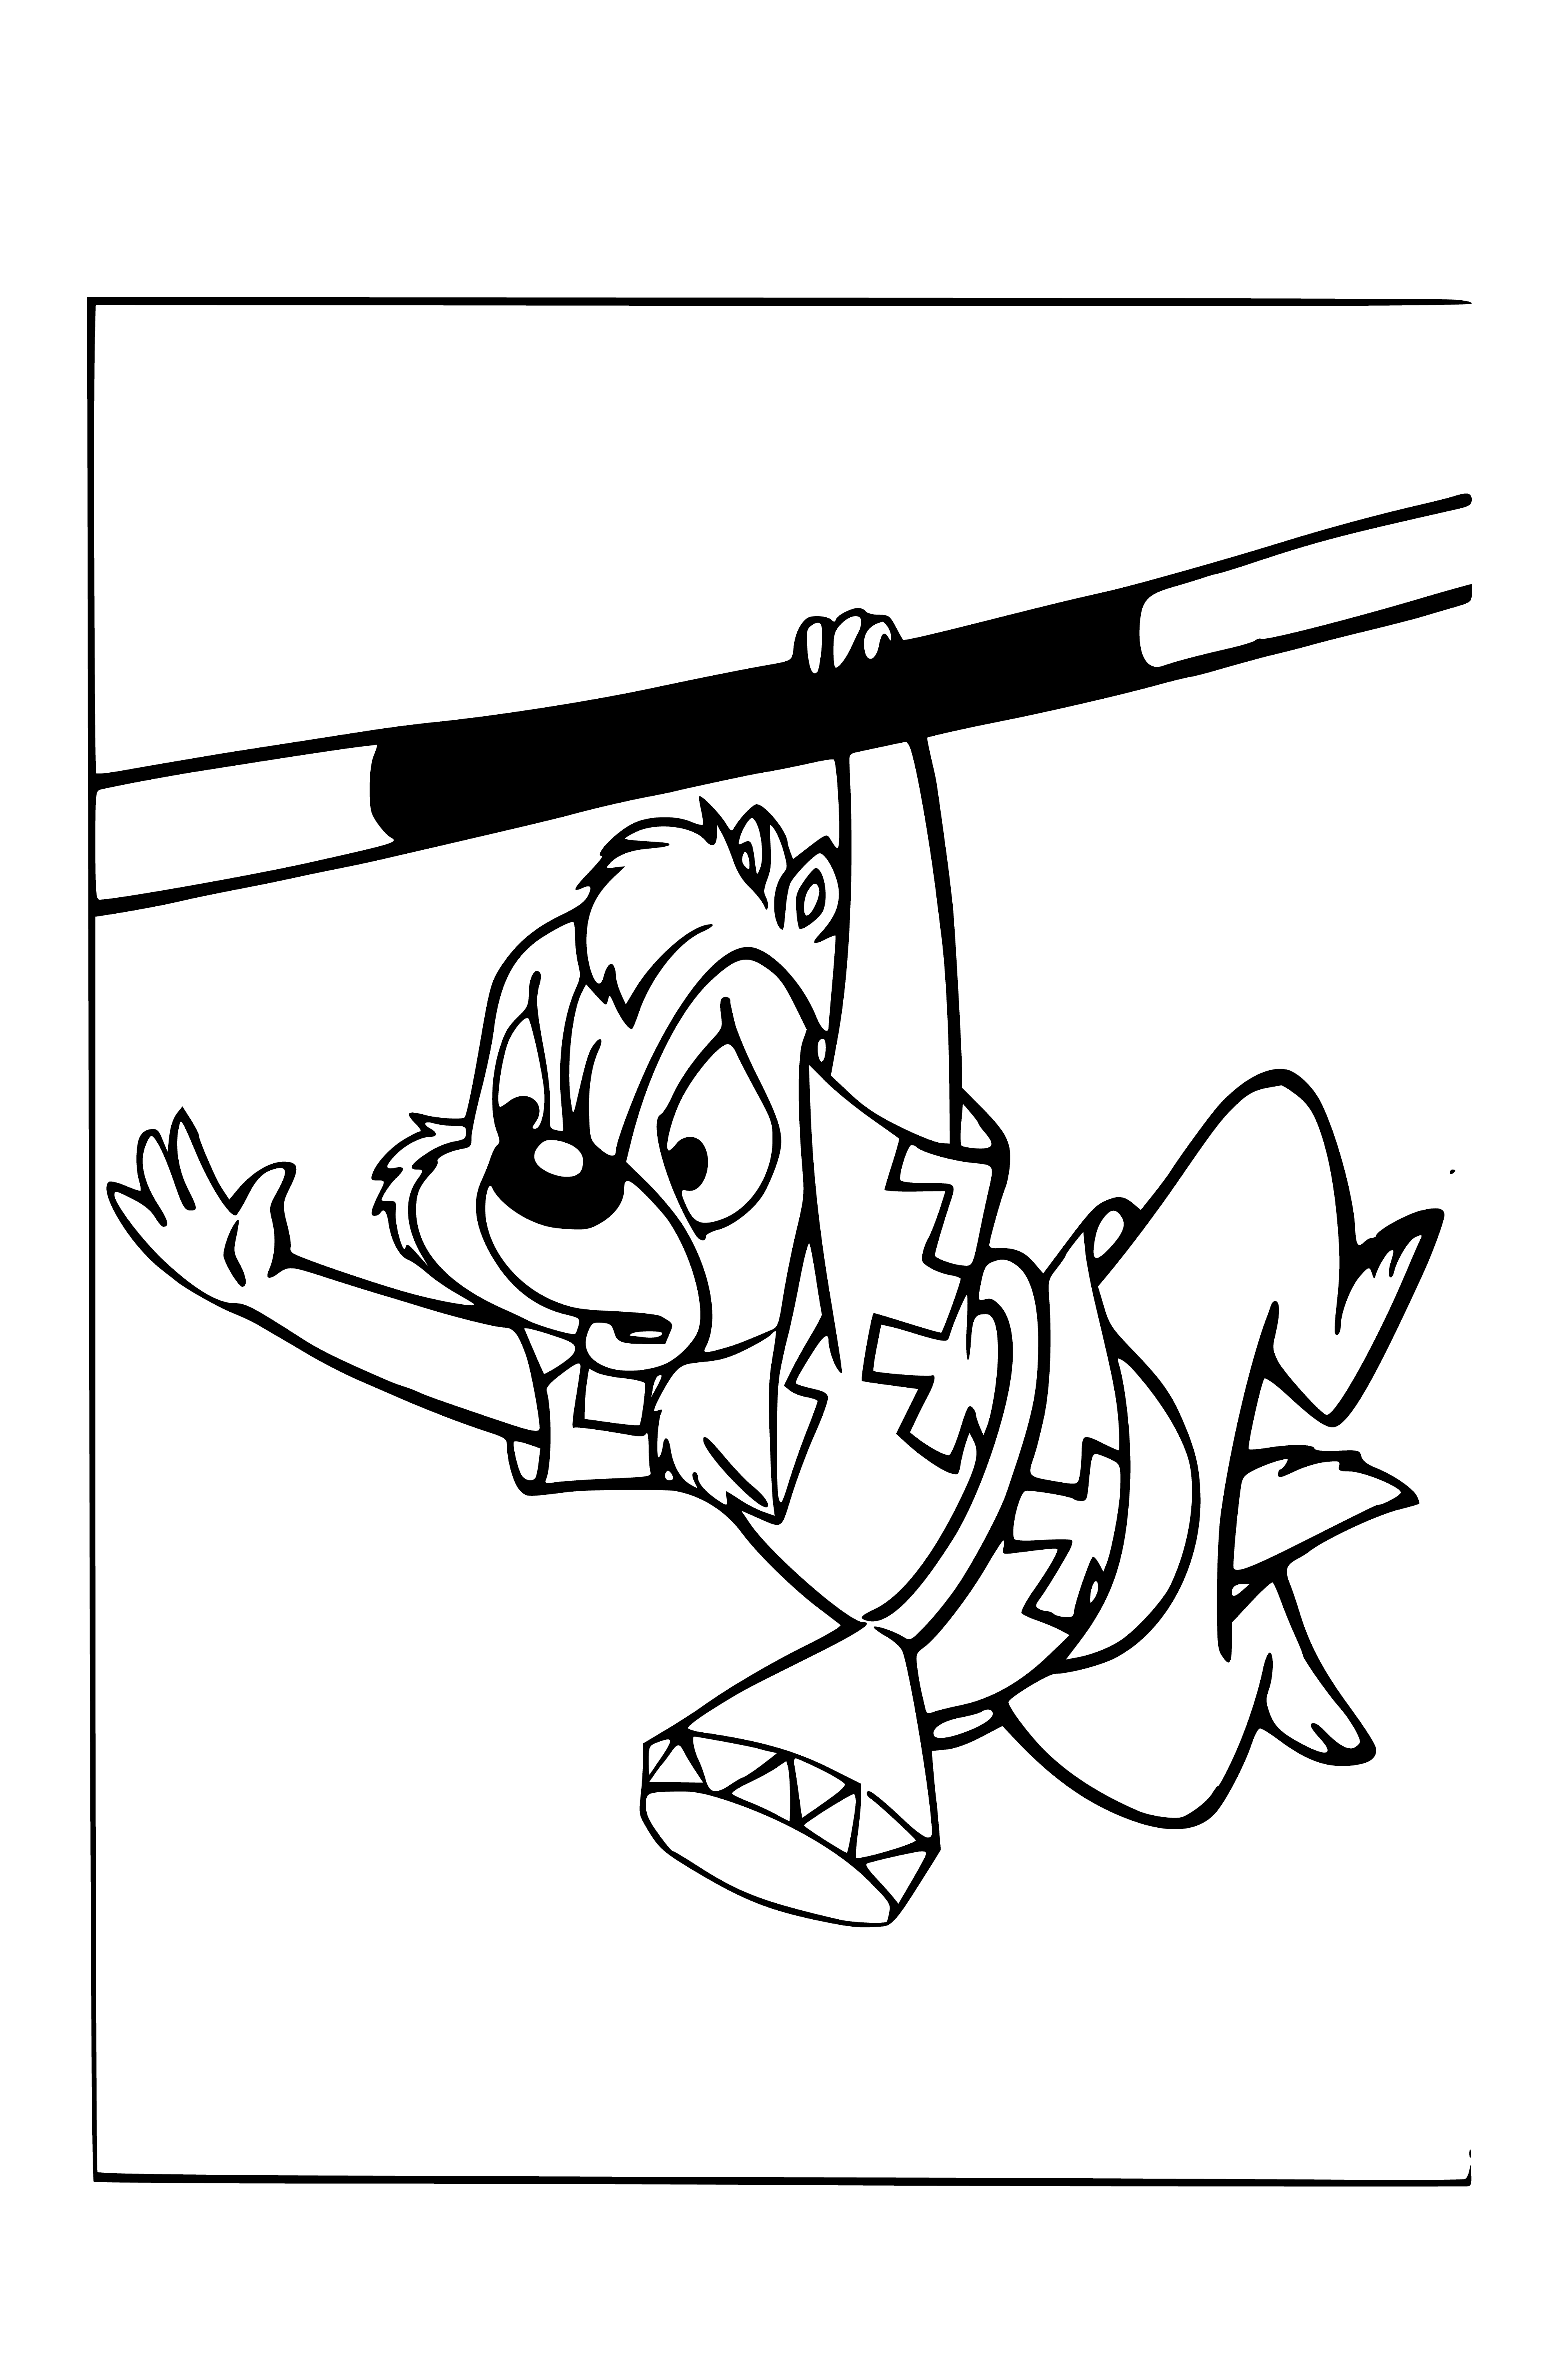 coloring page: Dale the Rescue Ranger chipmunk stands akimbo on a log wearing a backwards red baseball cap and a red & white ring.